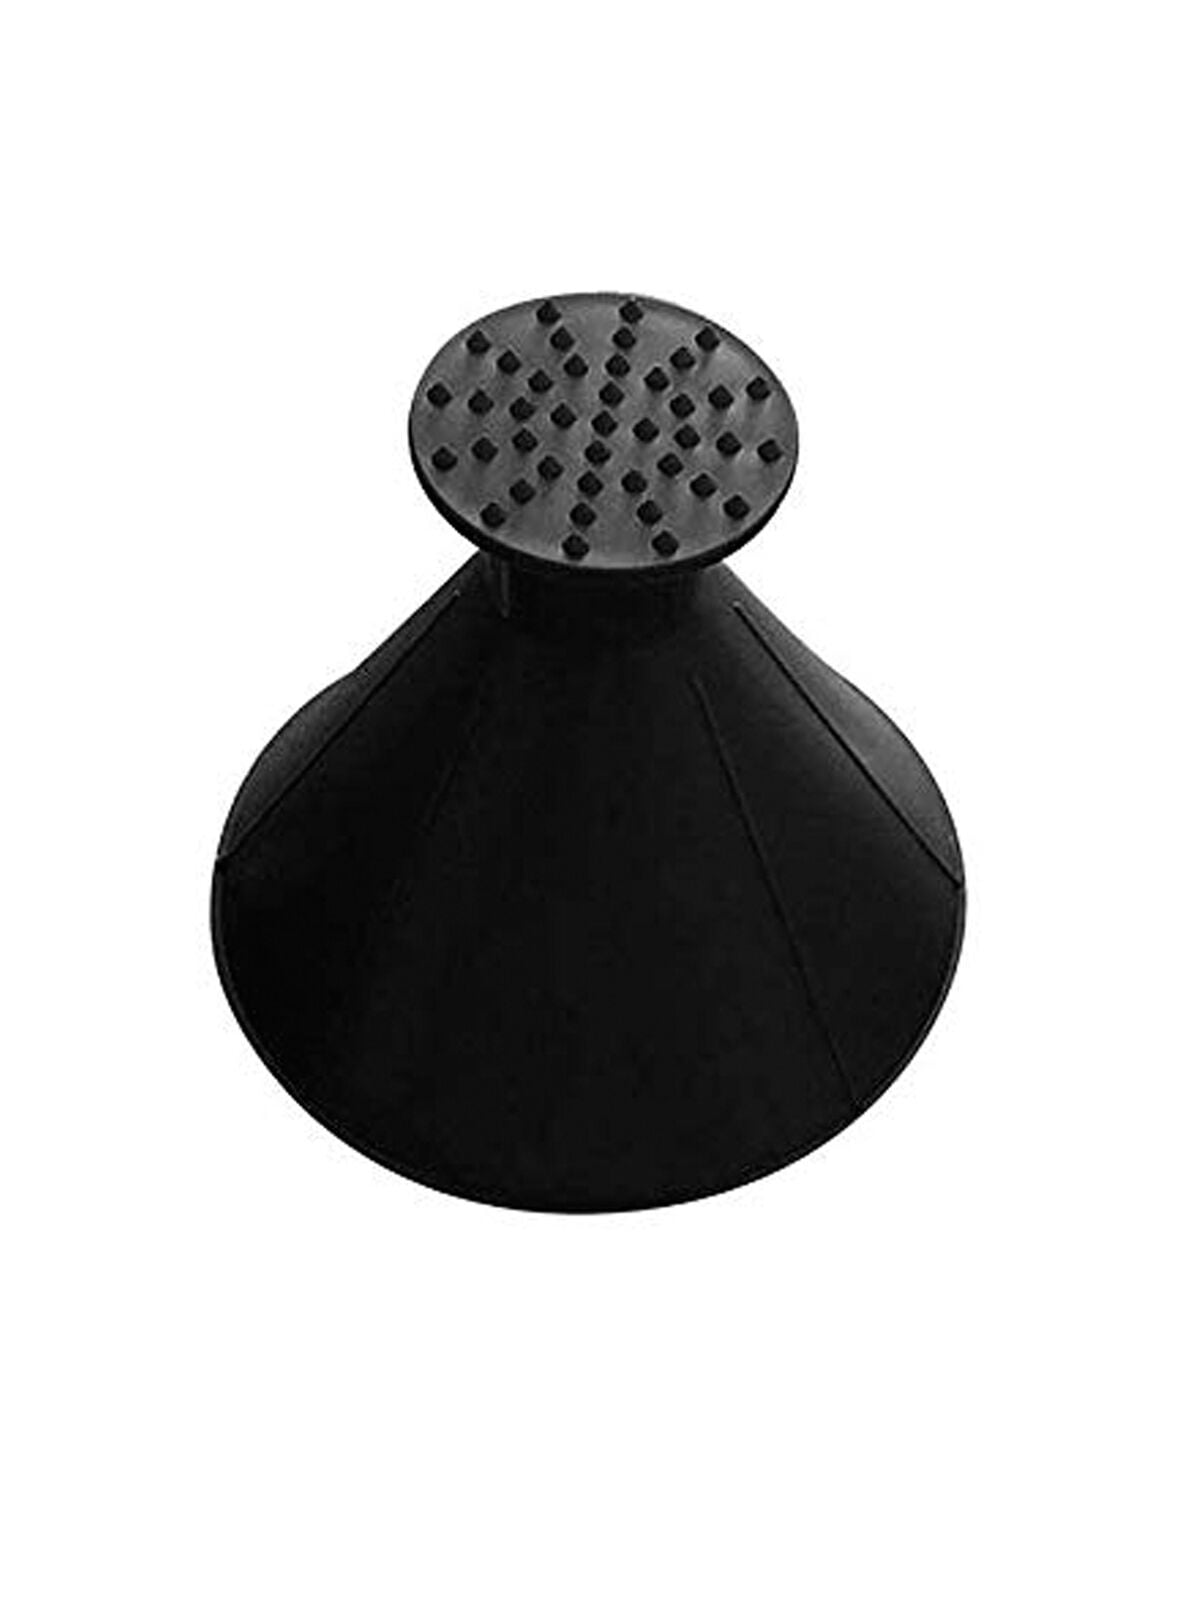 Magical Car Windshield ICES Snow Remover Scraper Tool Portable Cone Shaped Round Funnel SirMo Round Windshield Ice Scrapers 